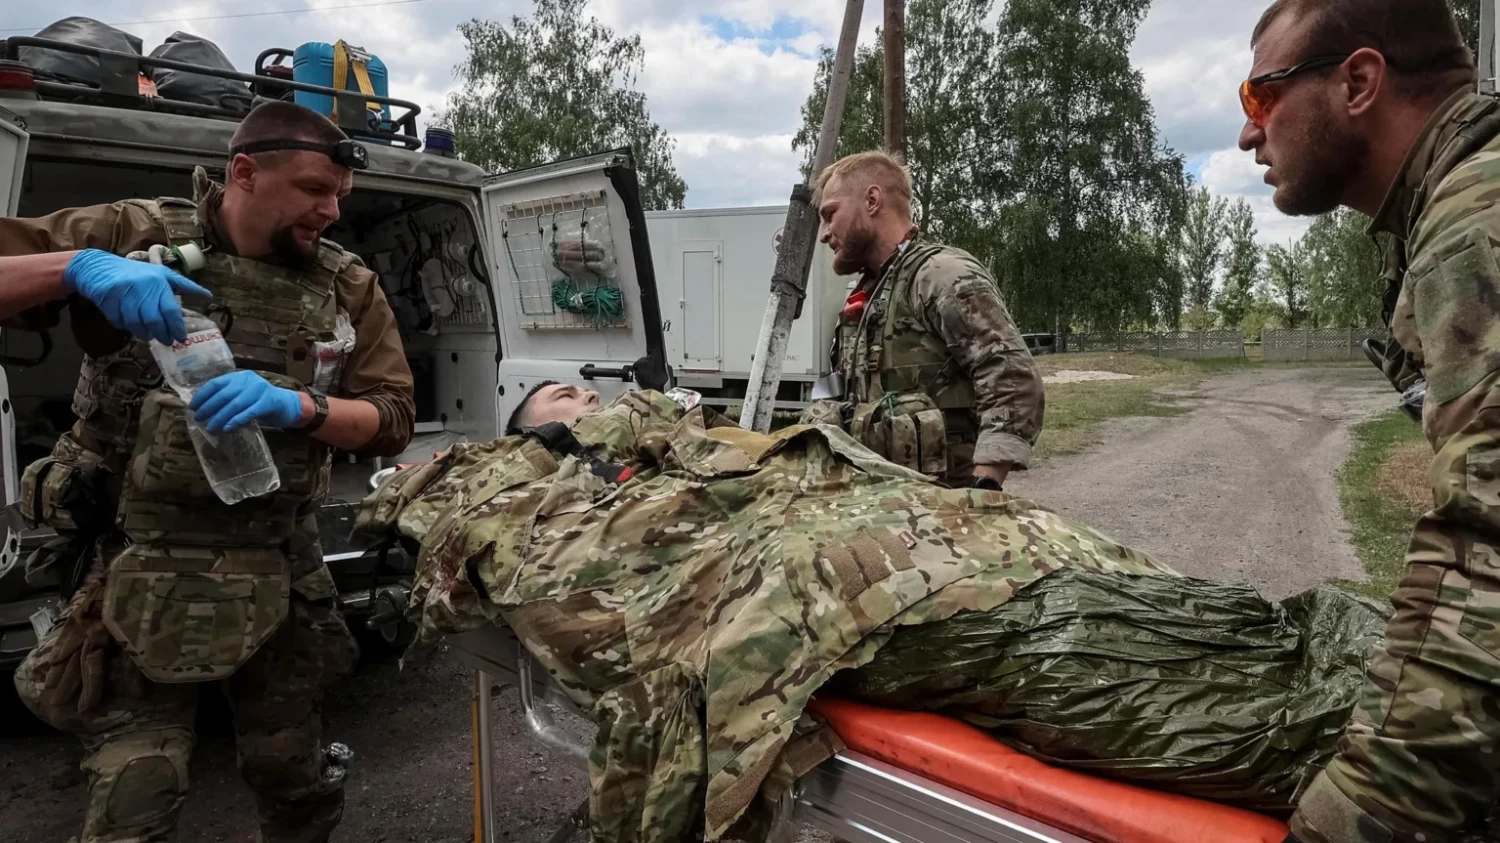 Military paramedics treat a wounded Ukrainian service member, amid Russia's attack on Ukraine, near the town of Vovchansk. Reuters